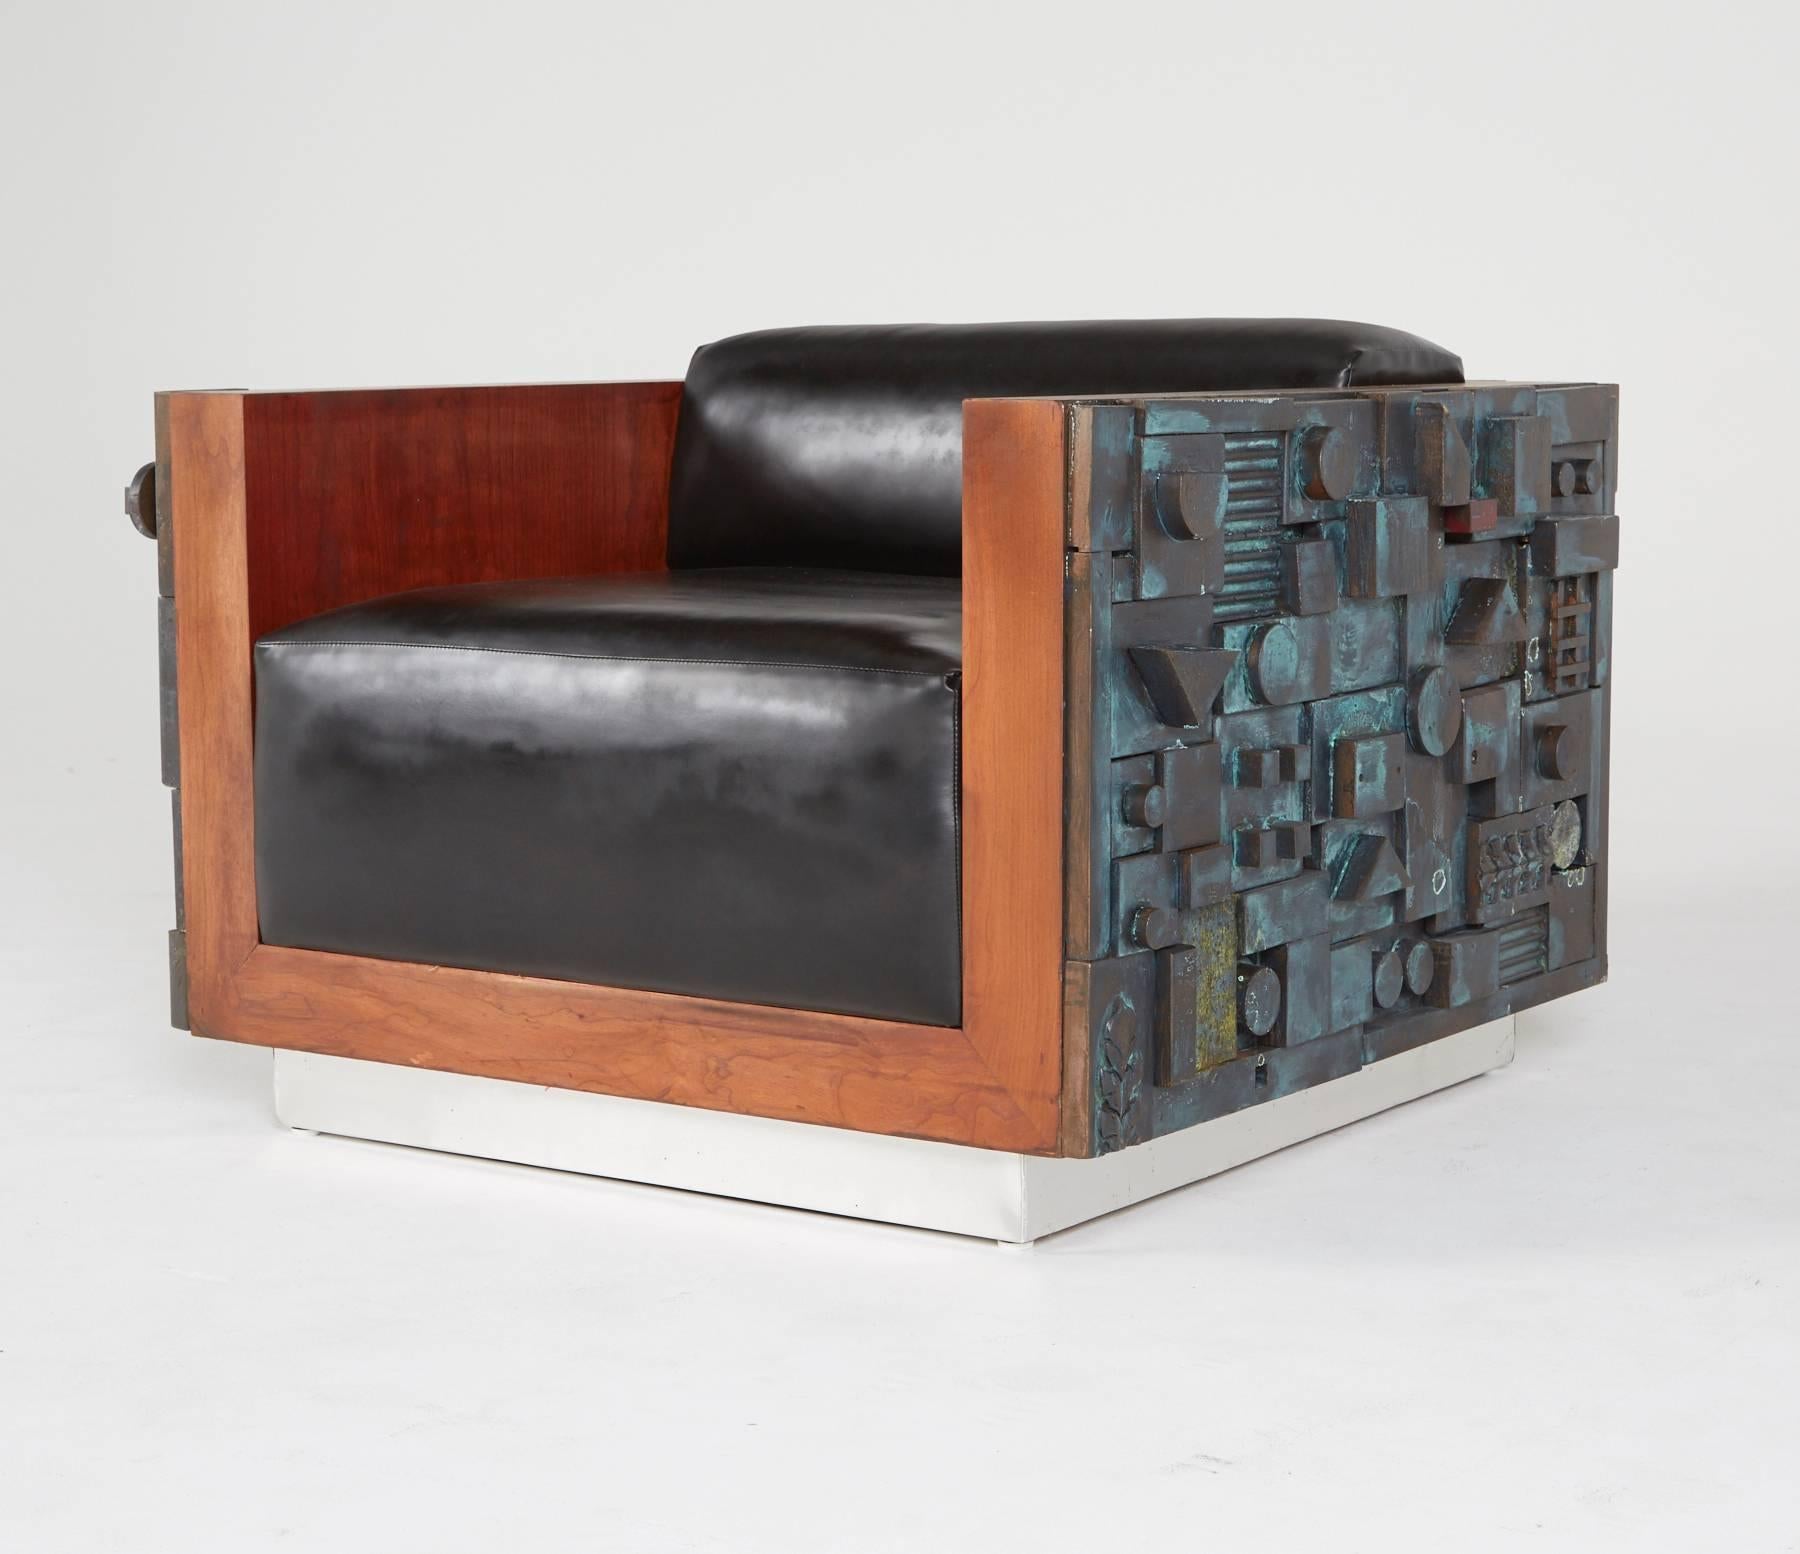 Limited edition, handcrafted lounge chairs by Lou Ramirez. Thick cushions are encased by vibrant wood frames, bookended by abstract Brutalist designs and a stylistic, manufactured patina. Elevated by a base with light metal laminate.

The